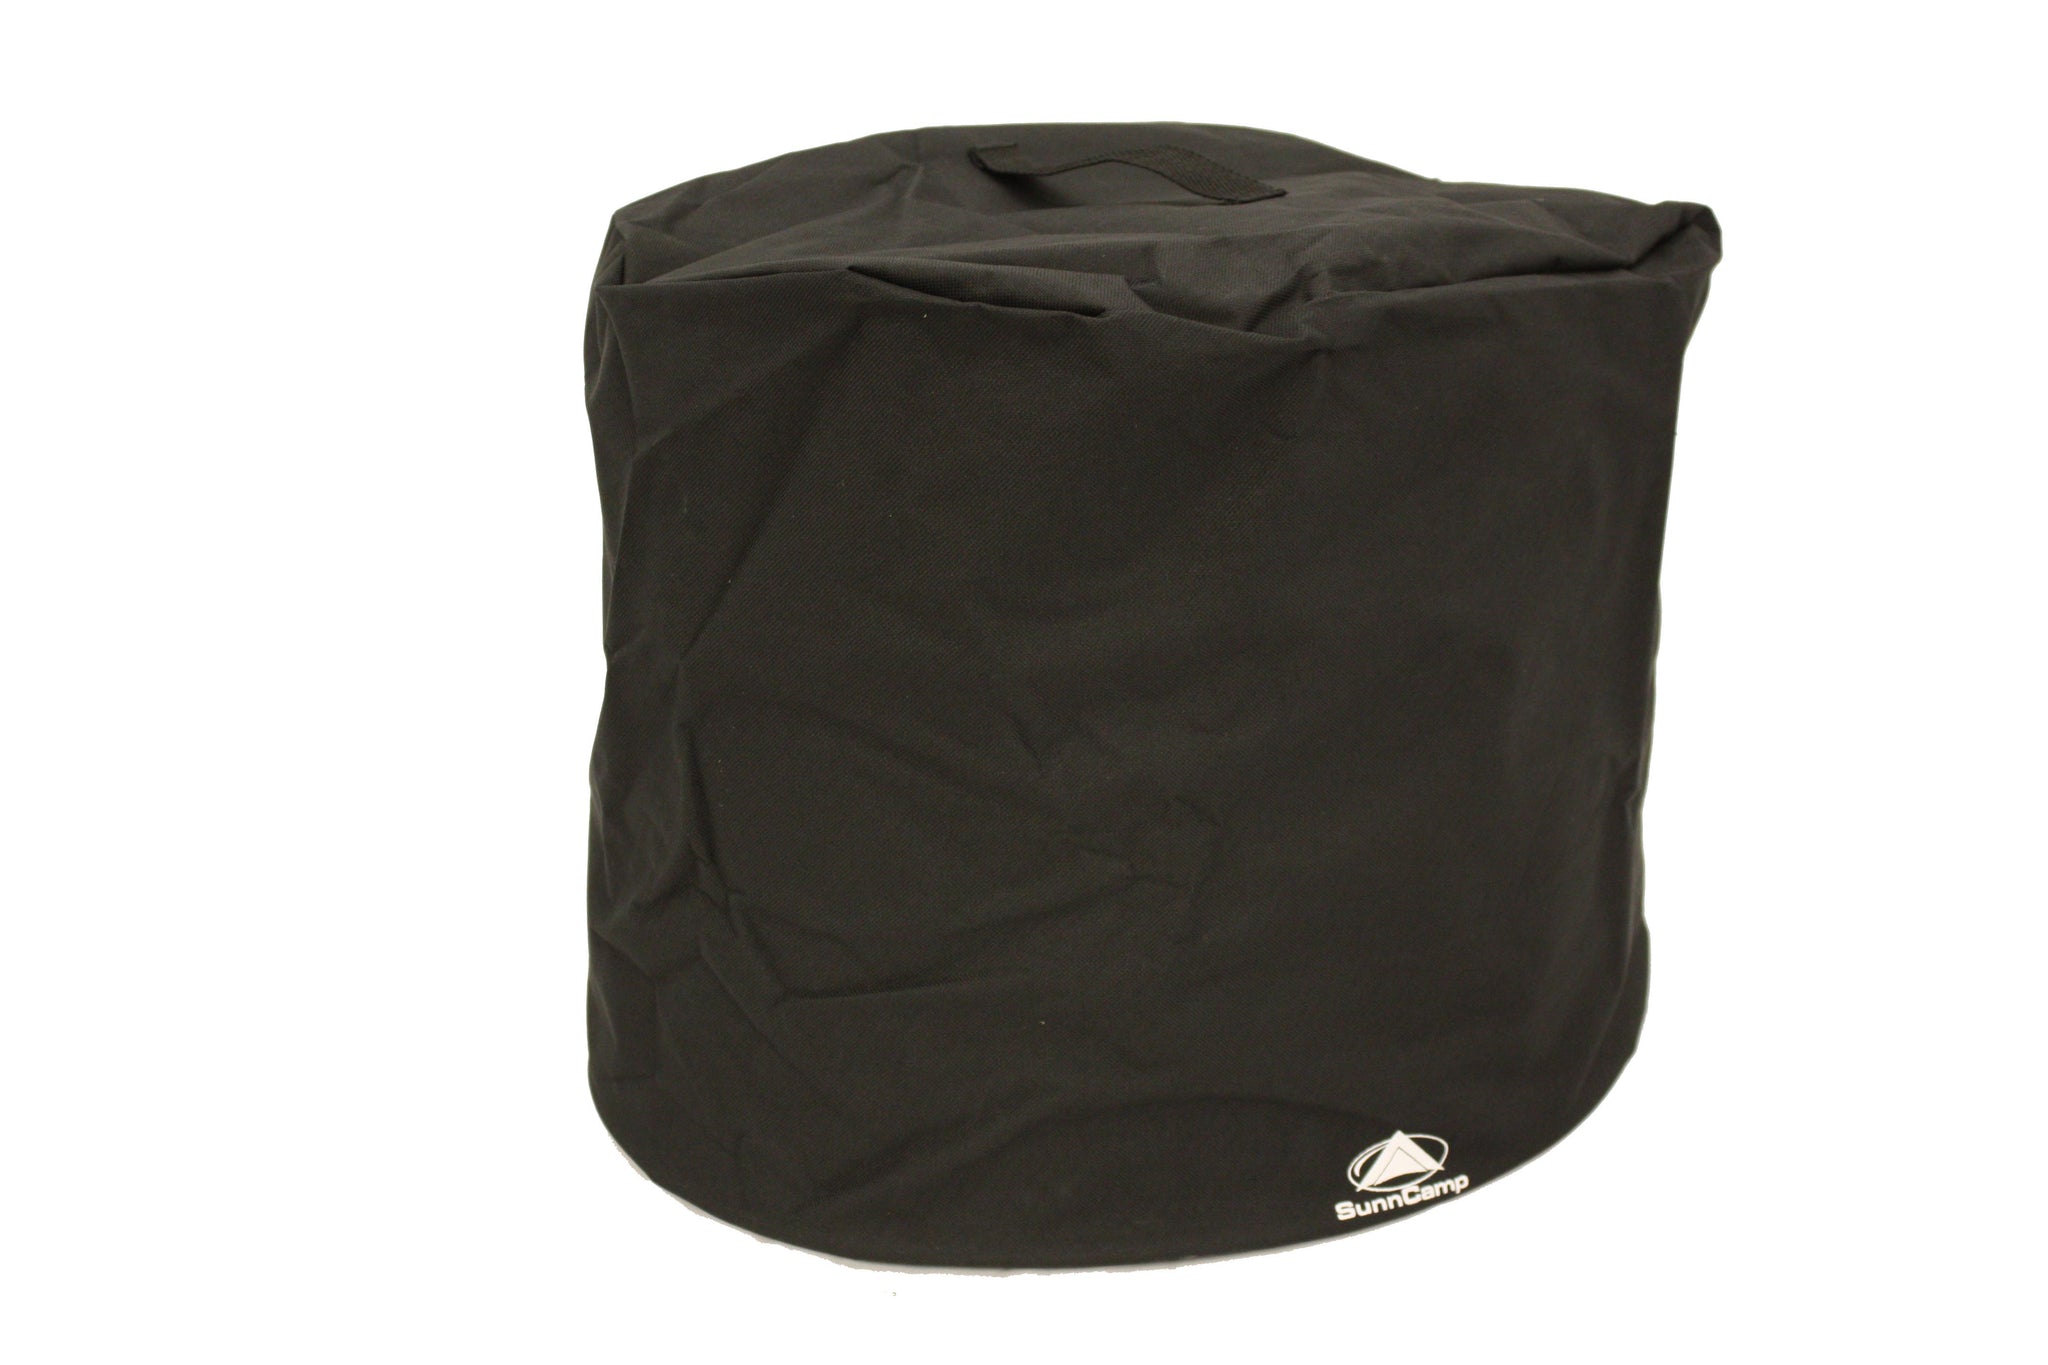 Handy Carry/Storage Bag for Lulu Tourlet Camping Toilet